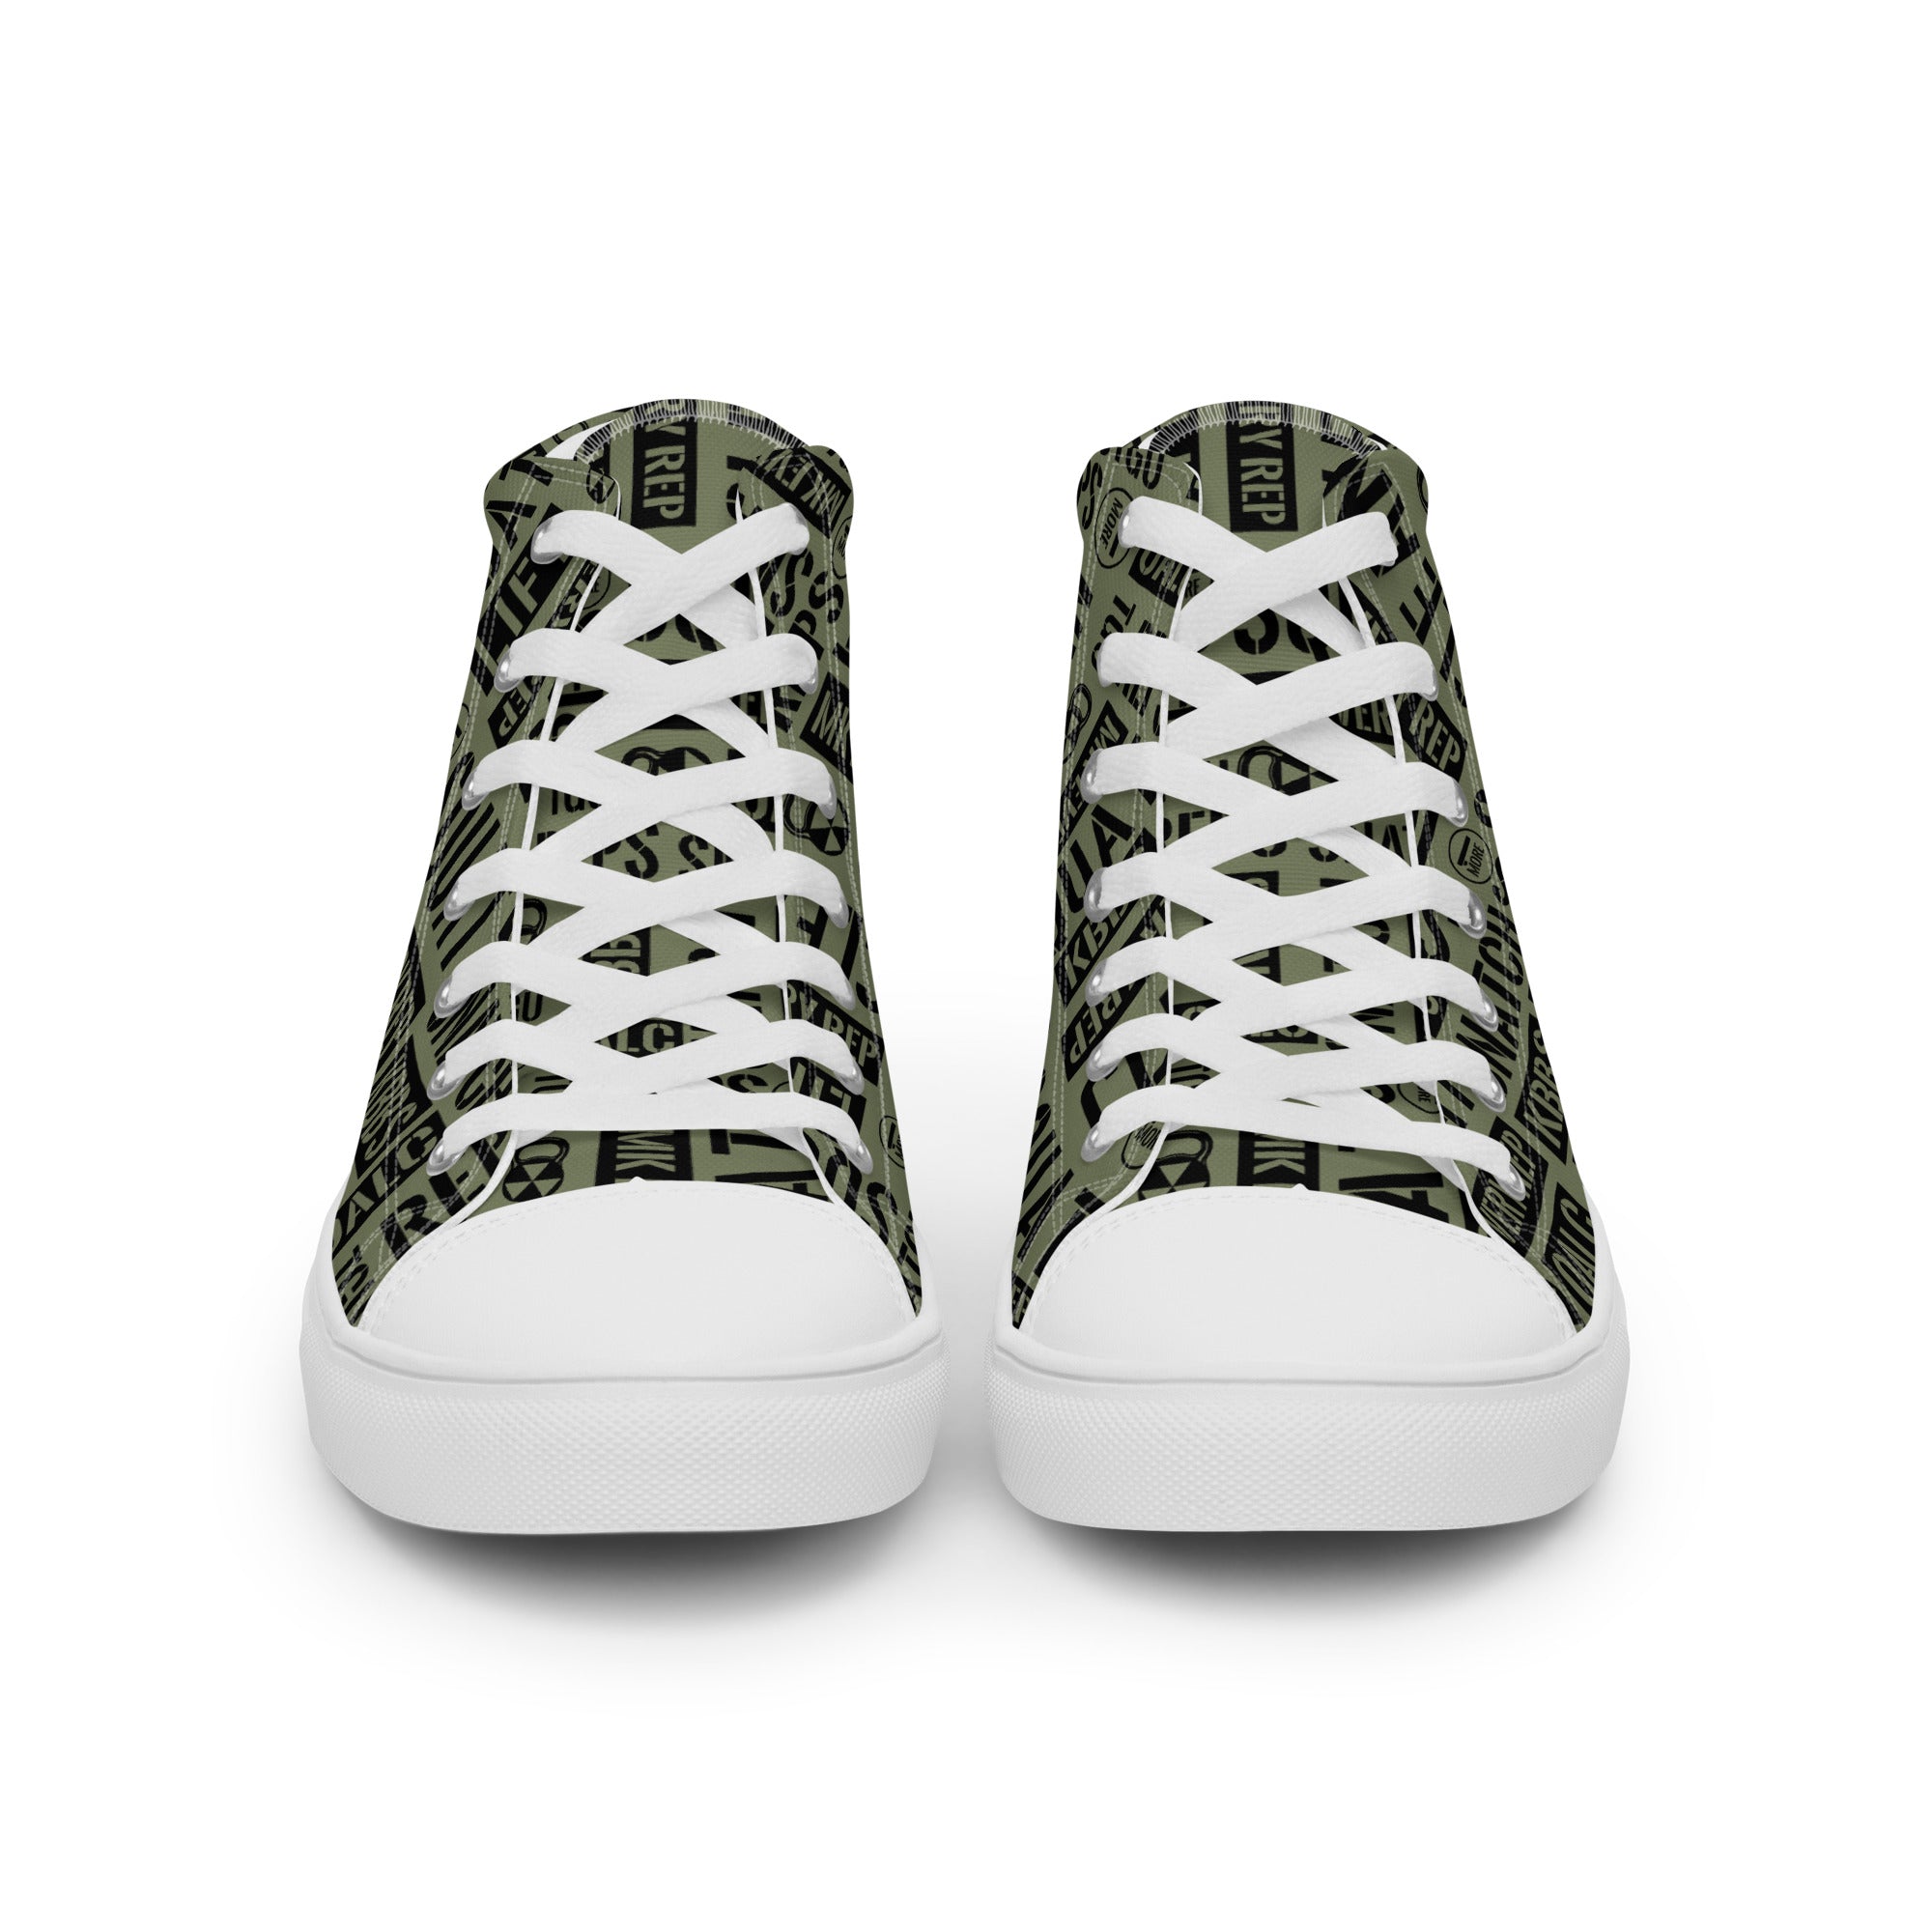 Women’s Military Green Acronyms High Tops Canvas Shoes